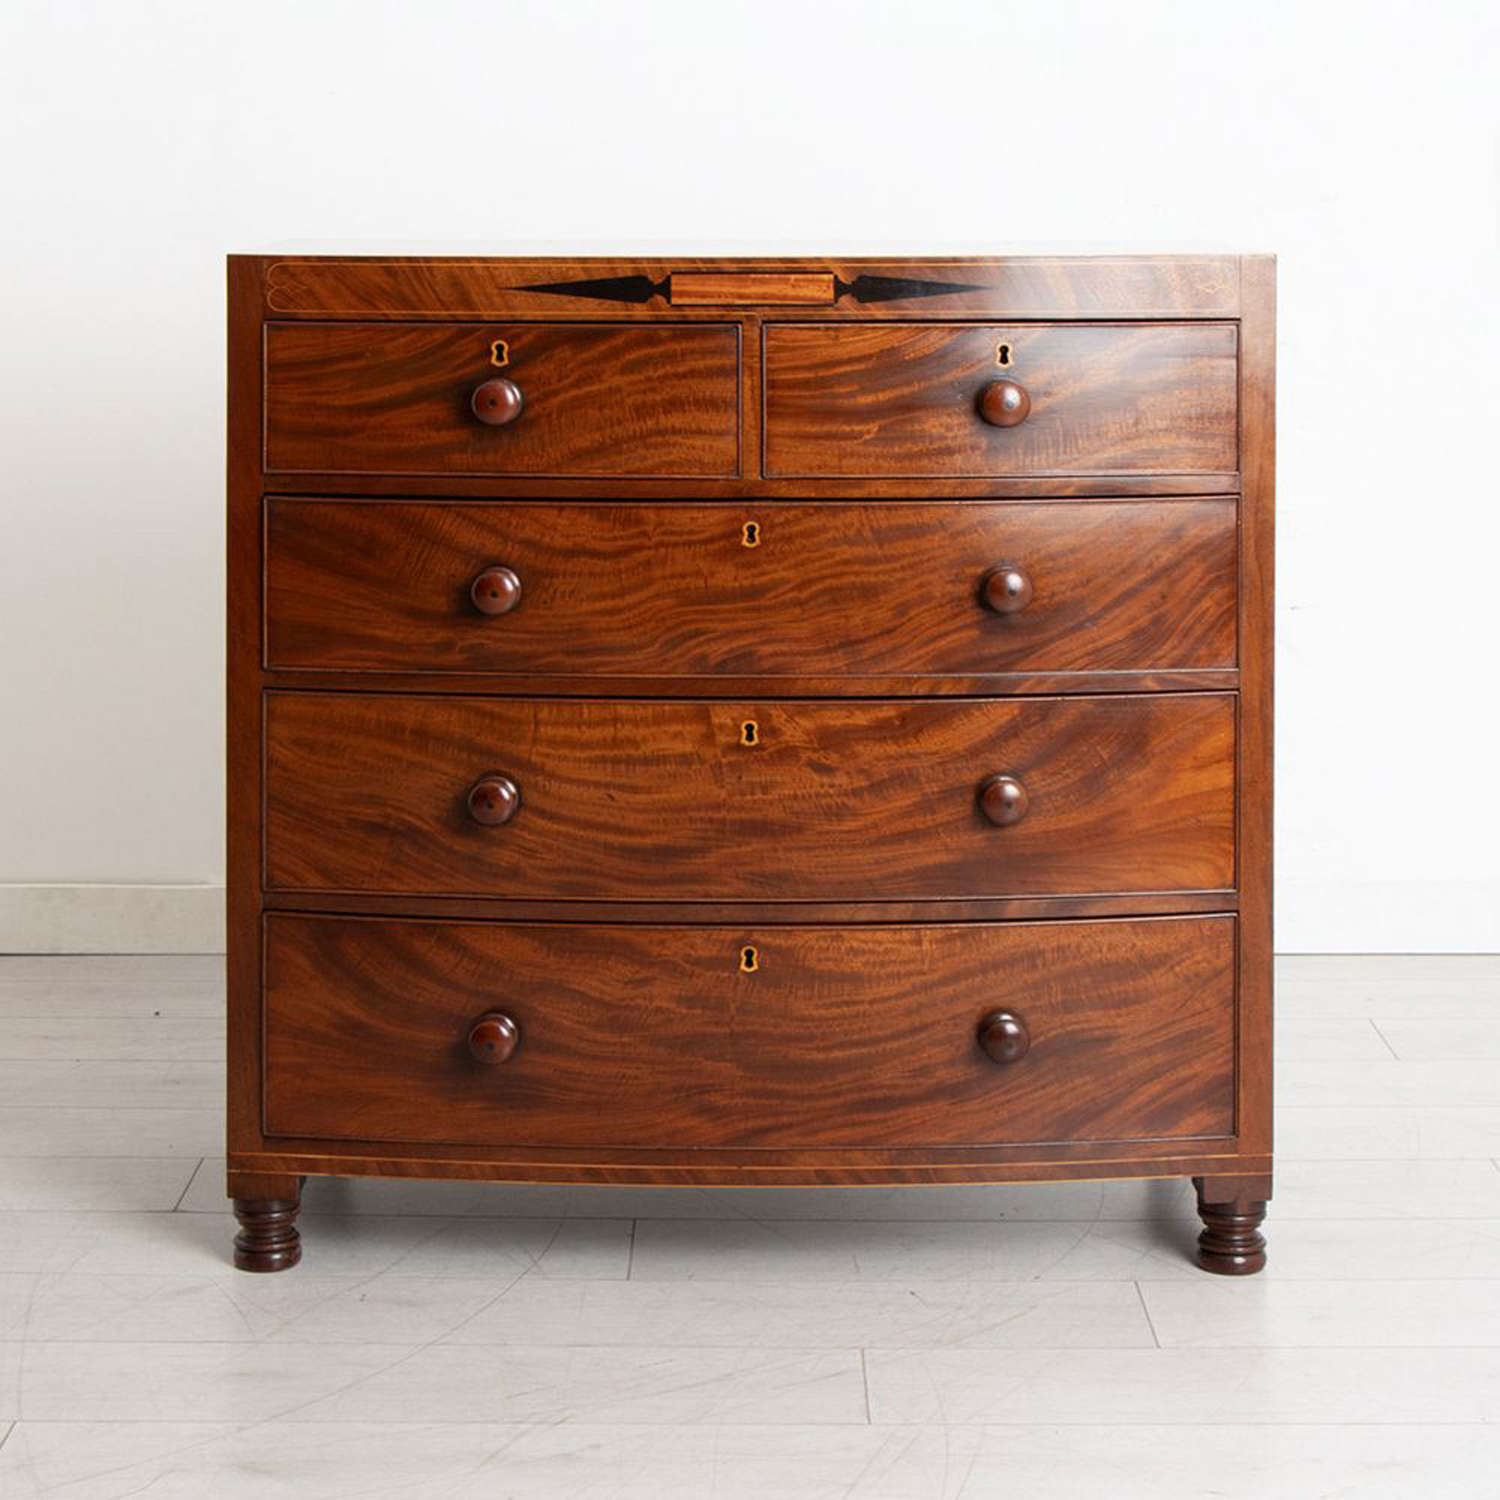 Georgian Mahogany Bow Front Chest of Drawers c.1840